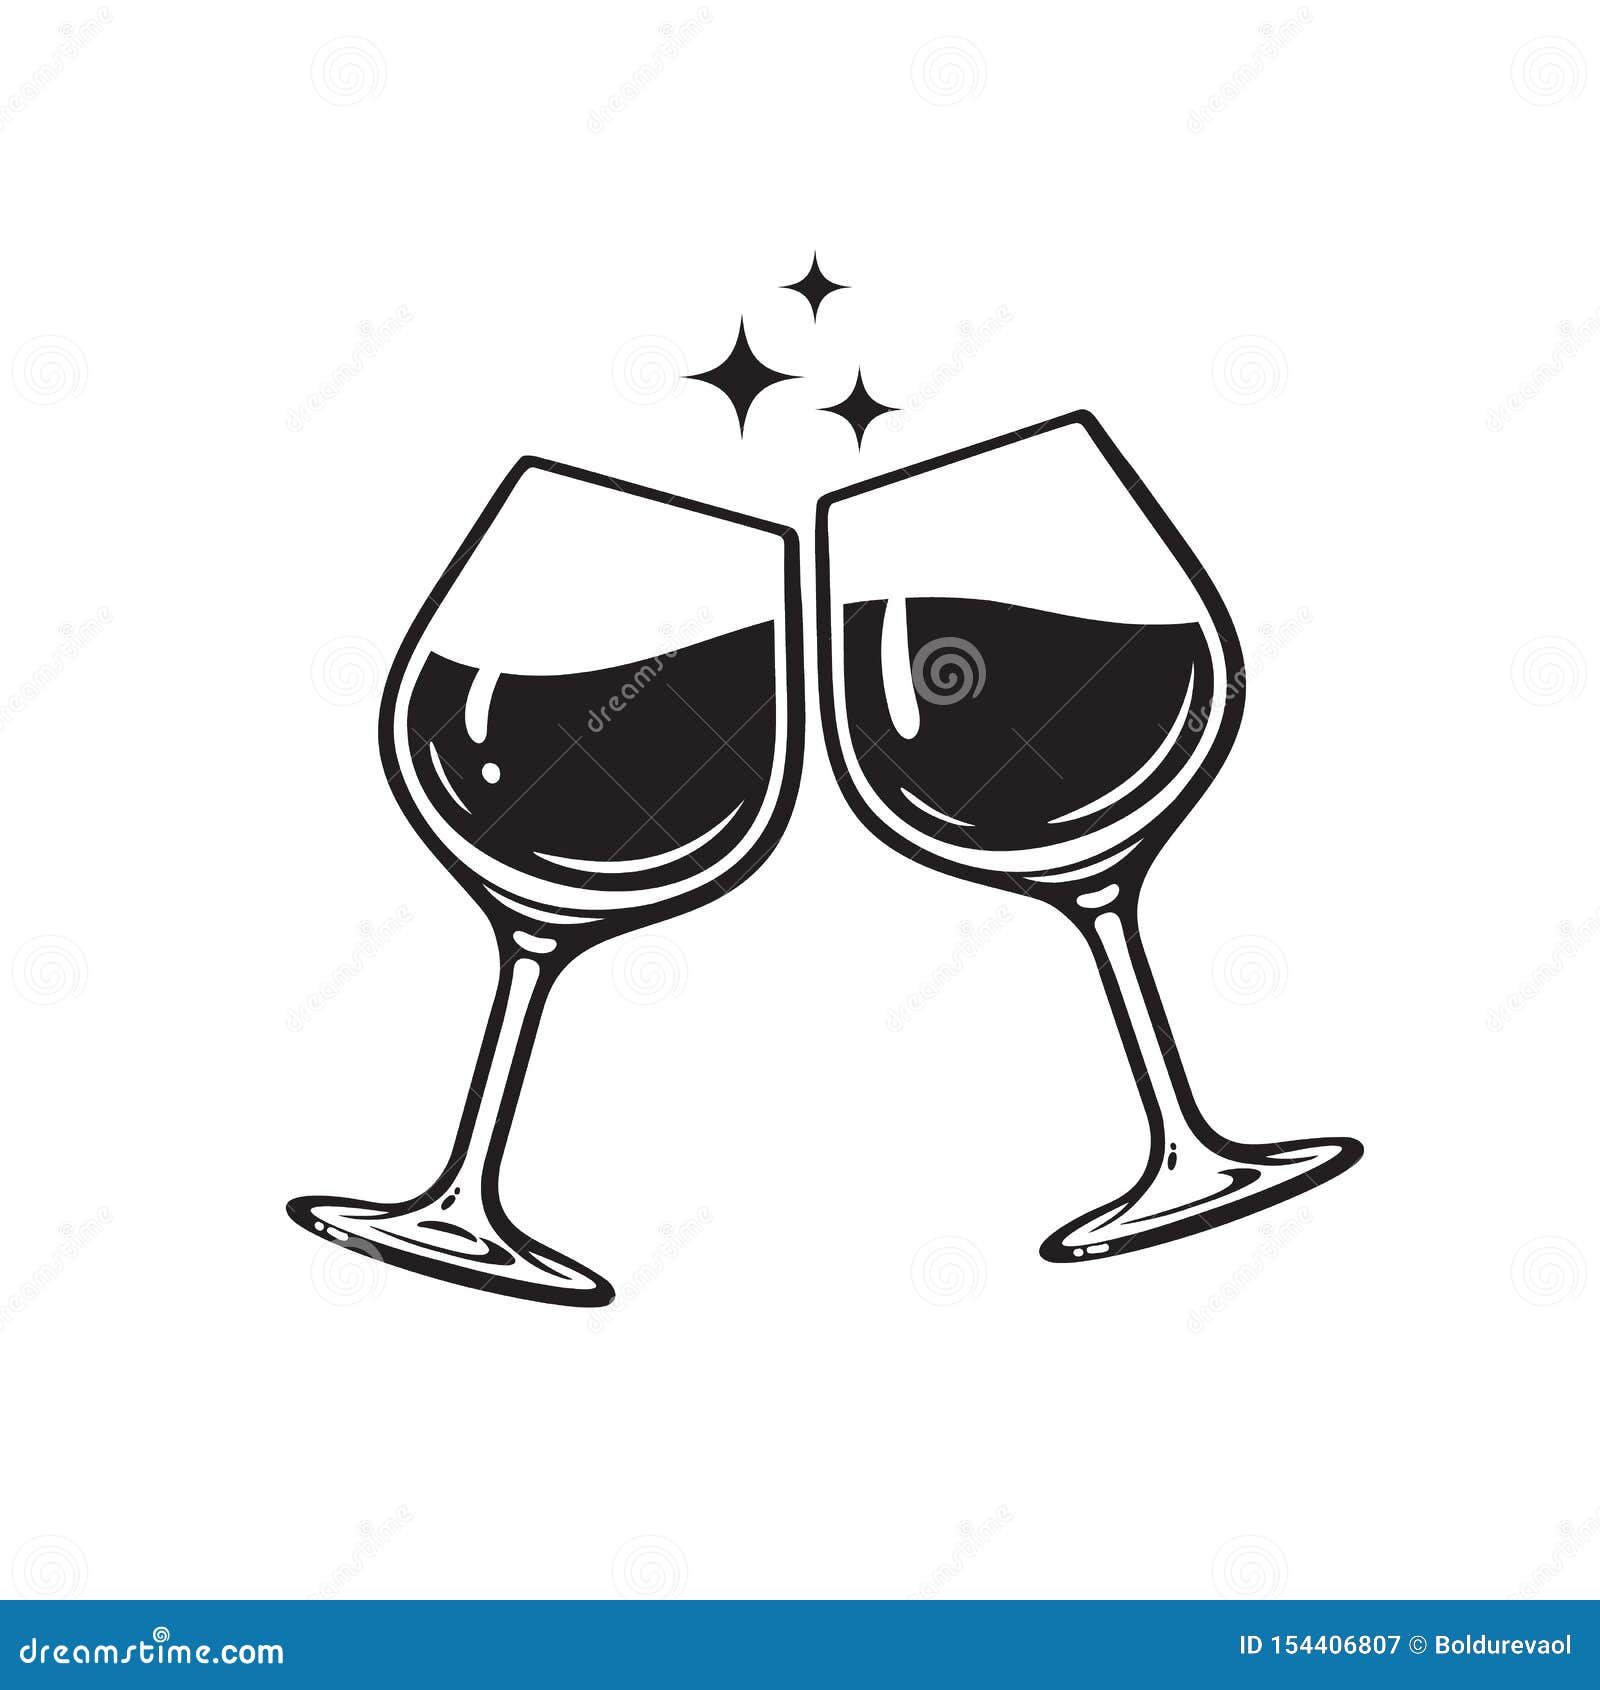 Cheers Cartoons, Illustrations & Vector Stock Images - 22482 Pictures